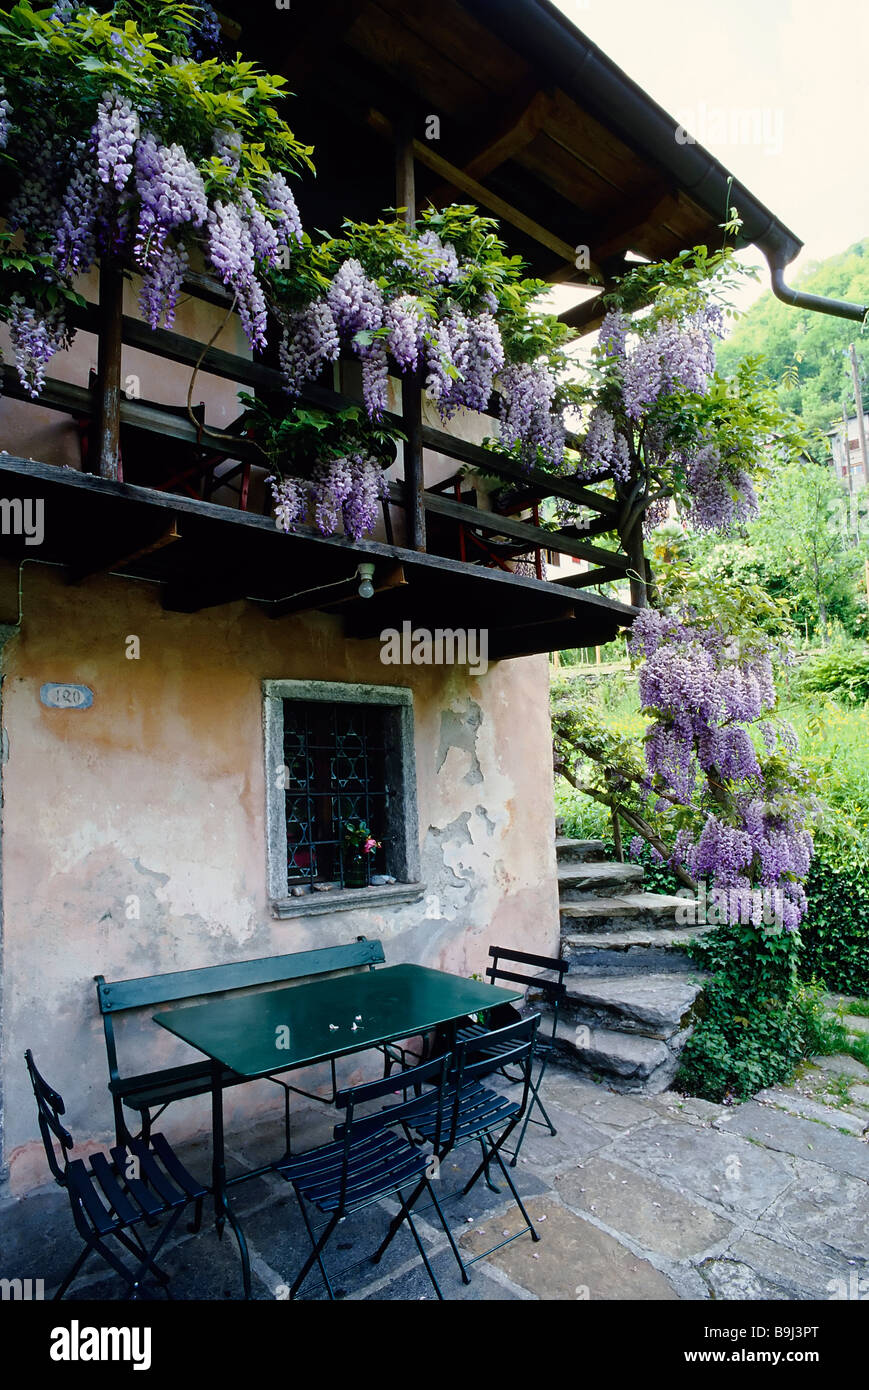 Idyllic house in Tessin, seat under a balcony with wisteria, Valle Onsernone, Canton of Tessin, Switzerland, Europe Stock Photo